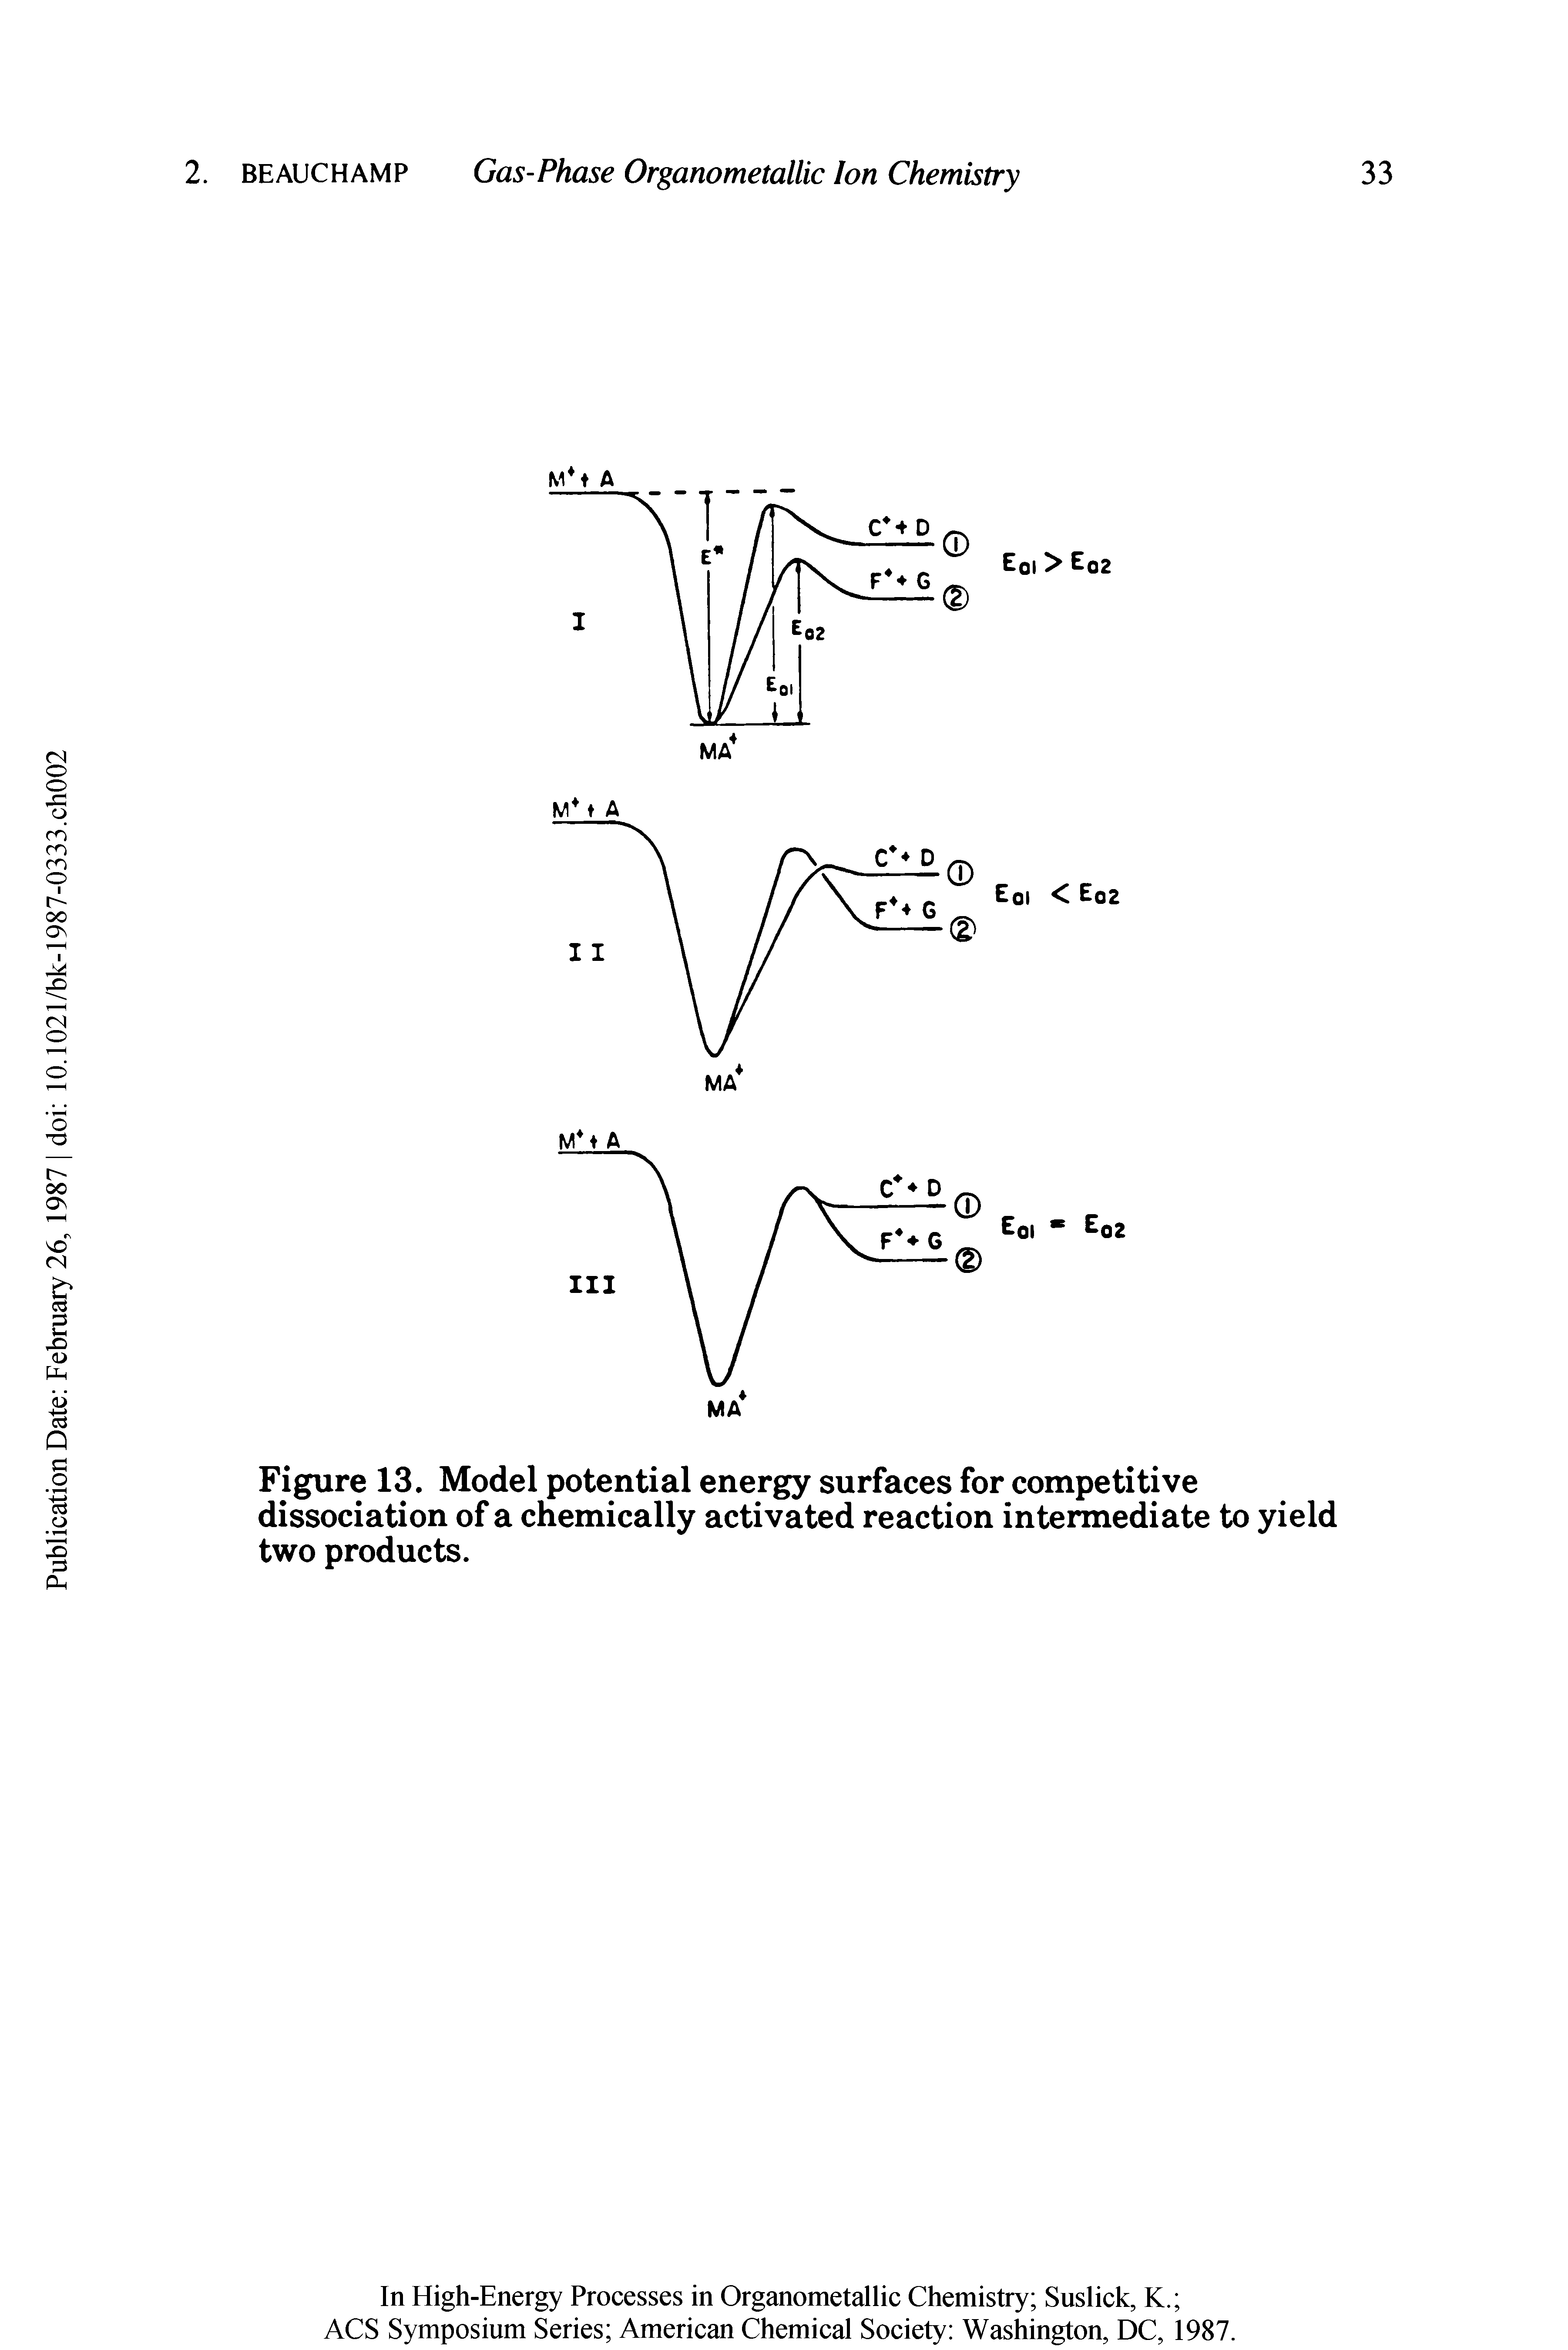 Figure 13. Model potential energy surfaces for competitive dissociation of a chemically activated reaction intermediate to yield two products.